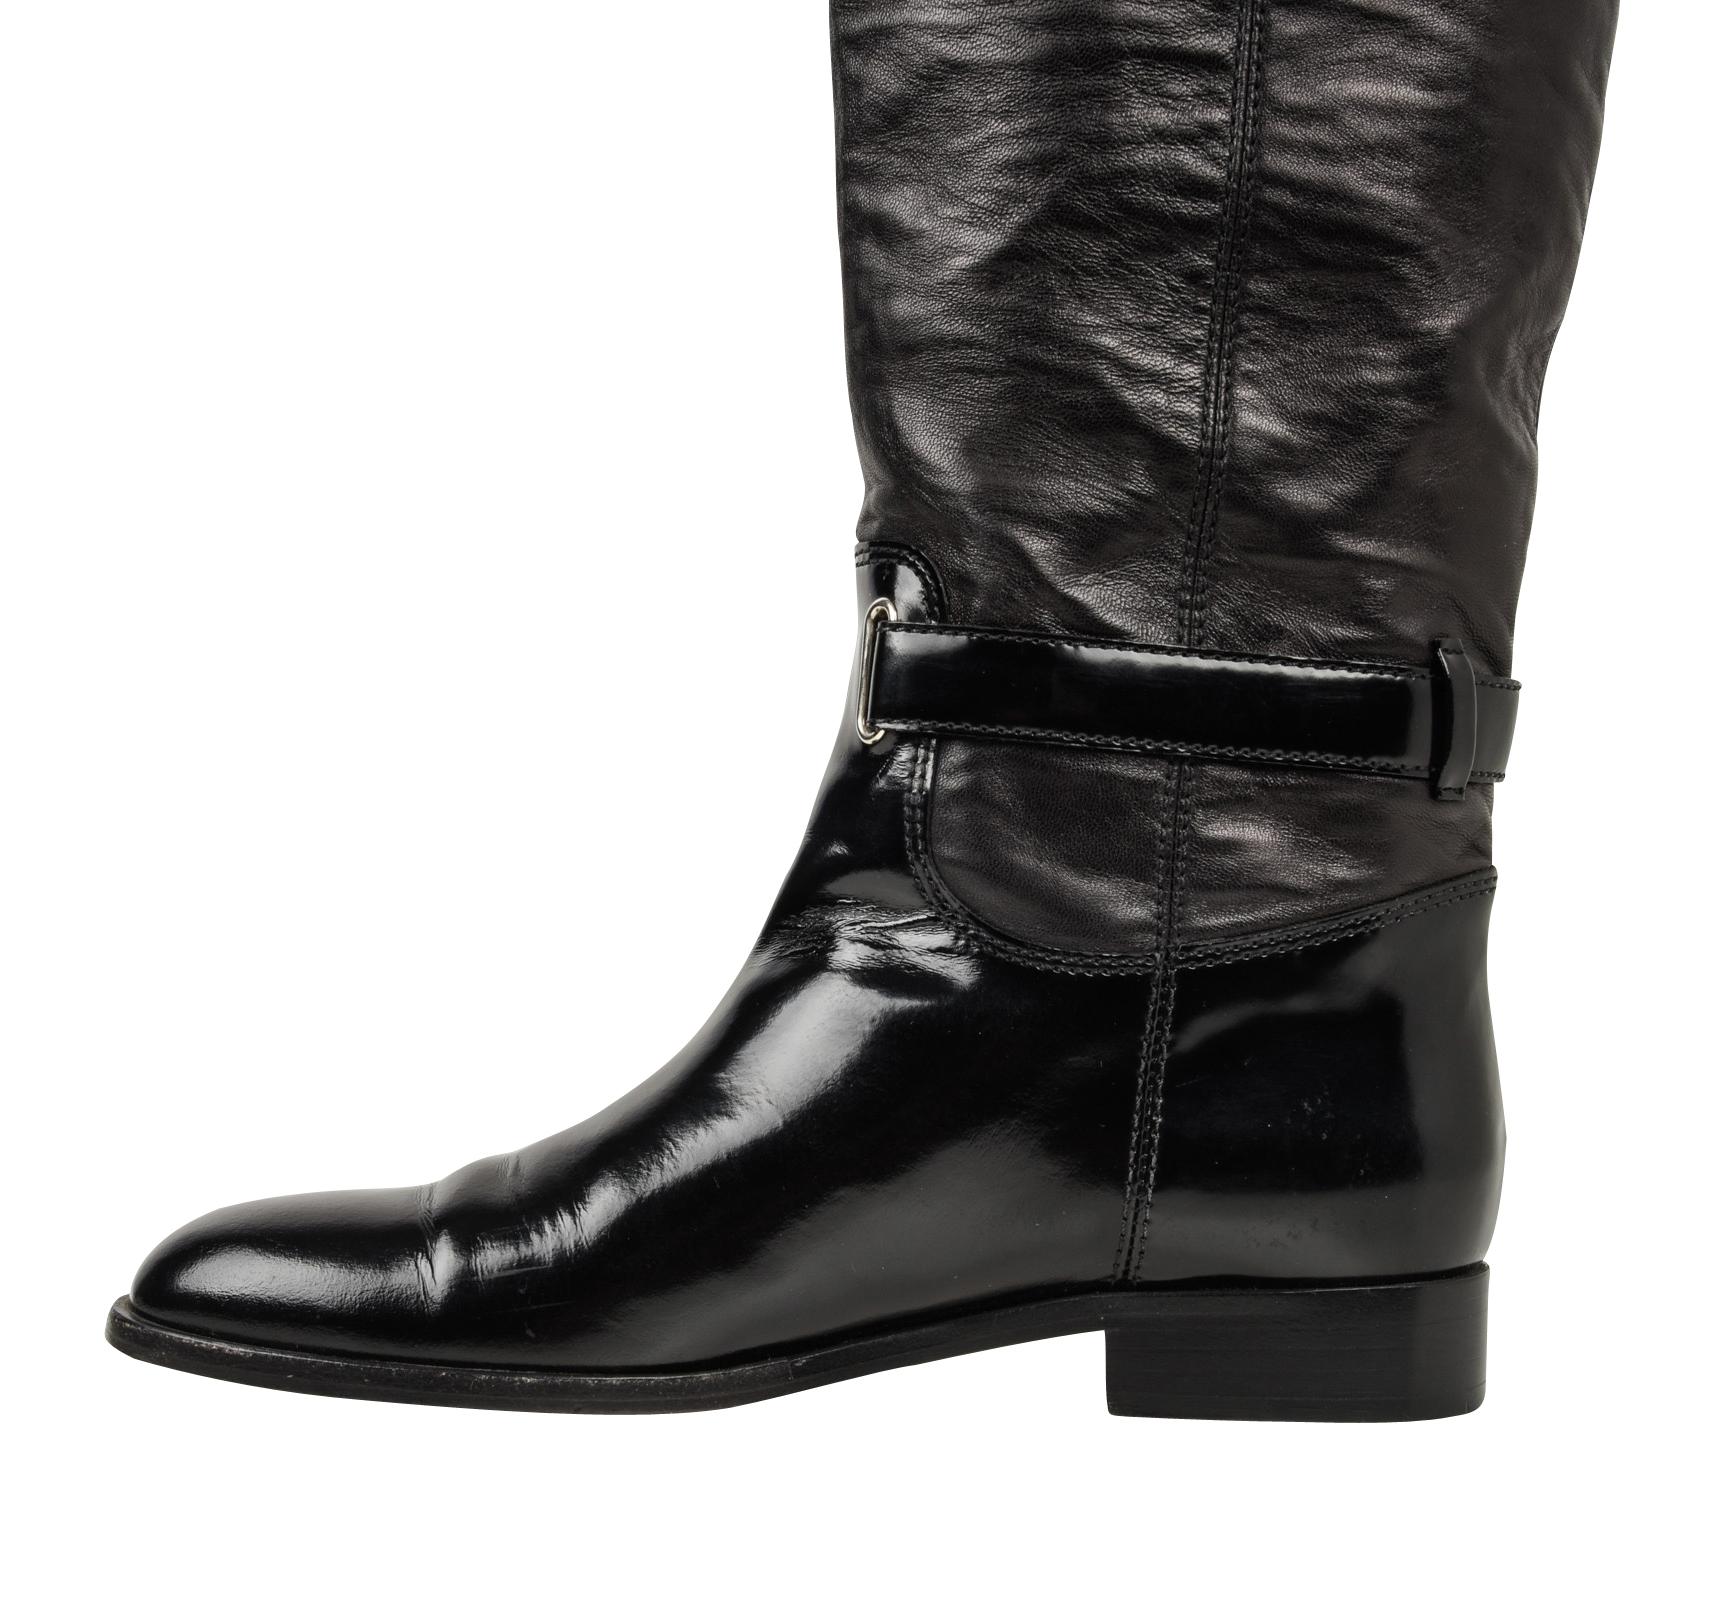 Christian Dior Boot Flat Riding Style Knee High 39 / 9 2